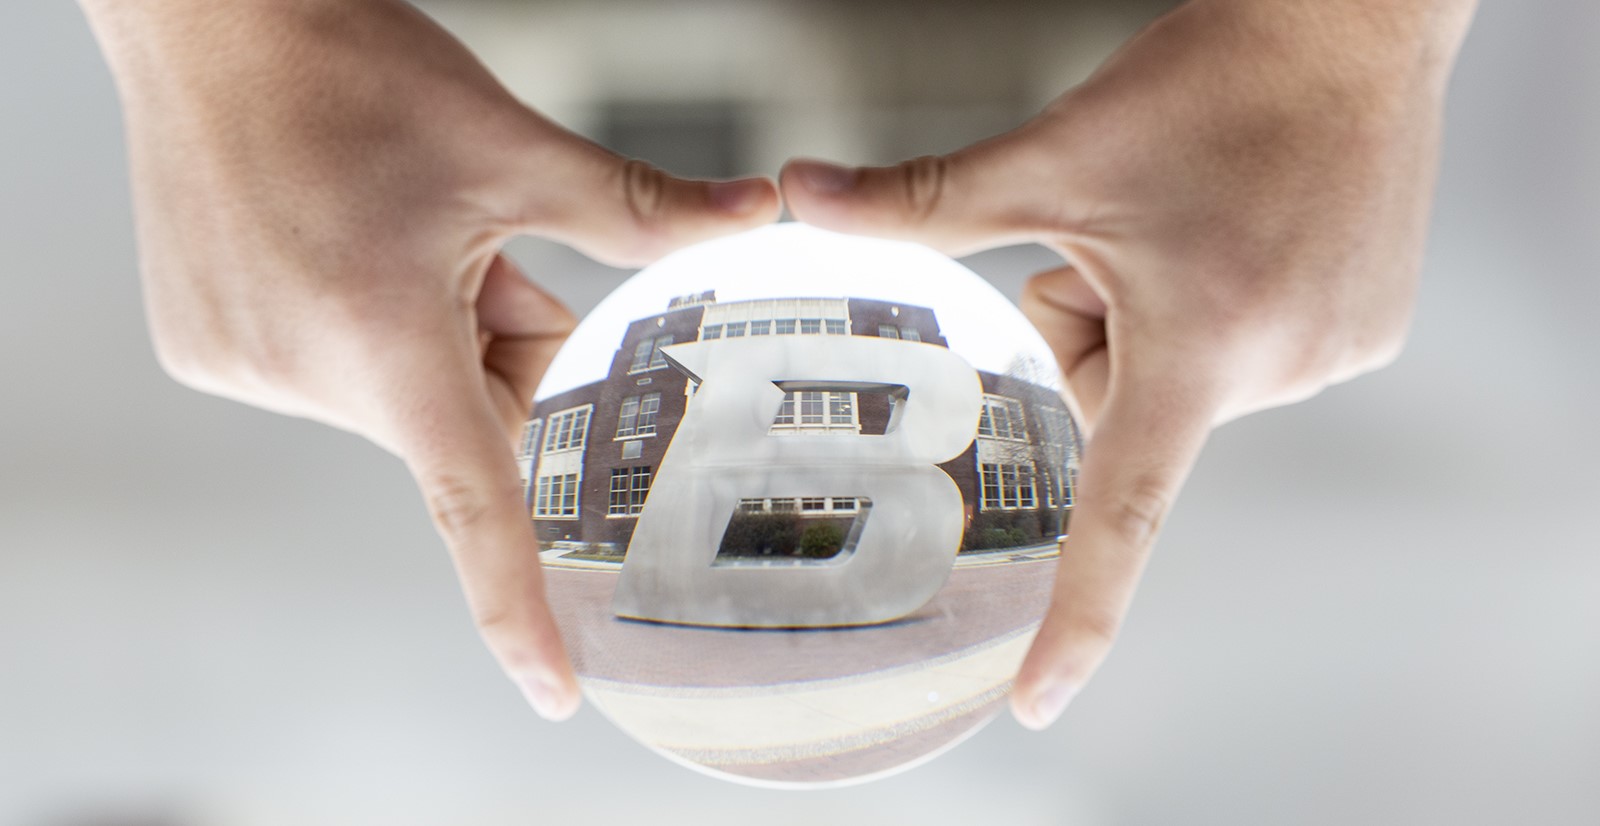 Boise State B statue reflected in a glass orb